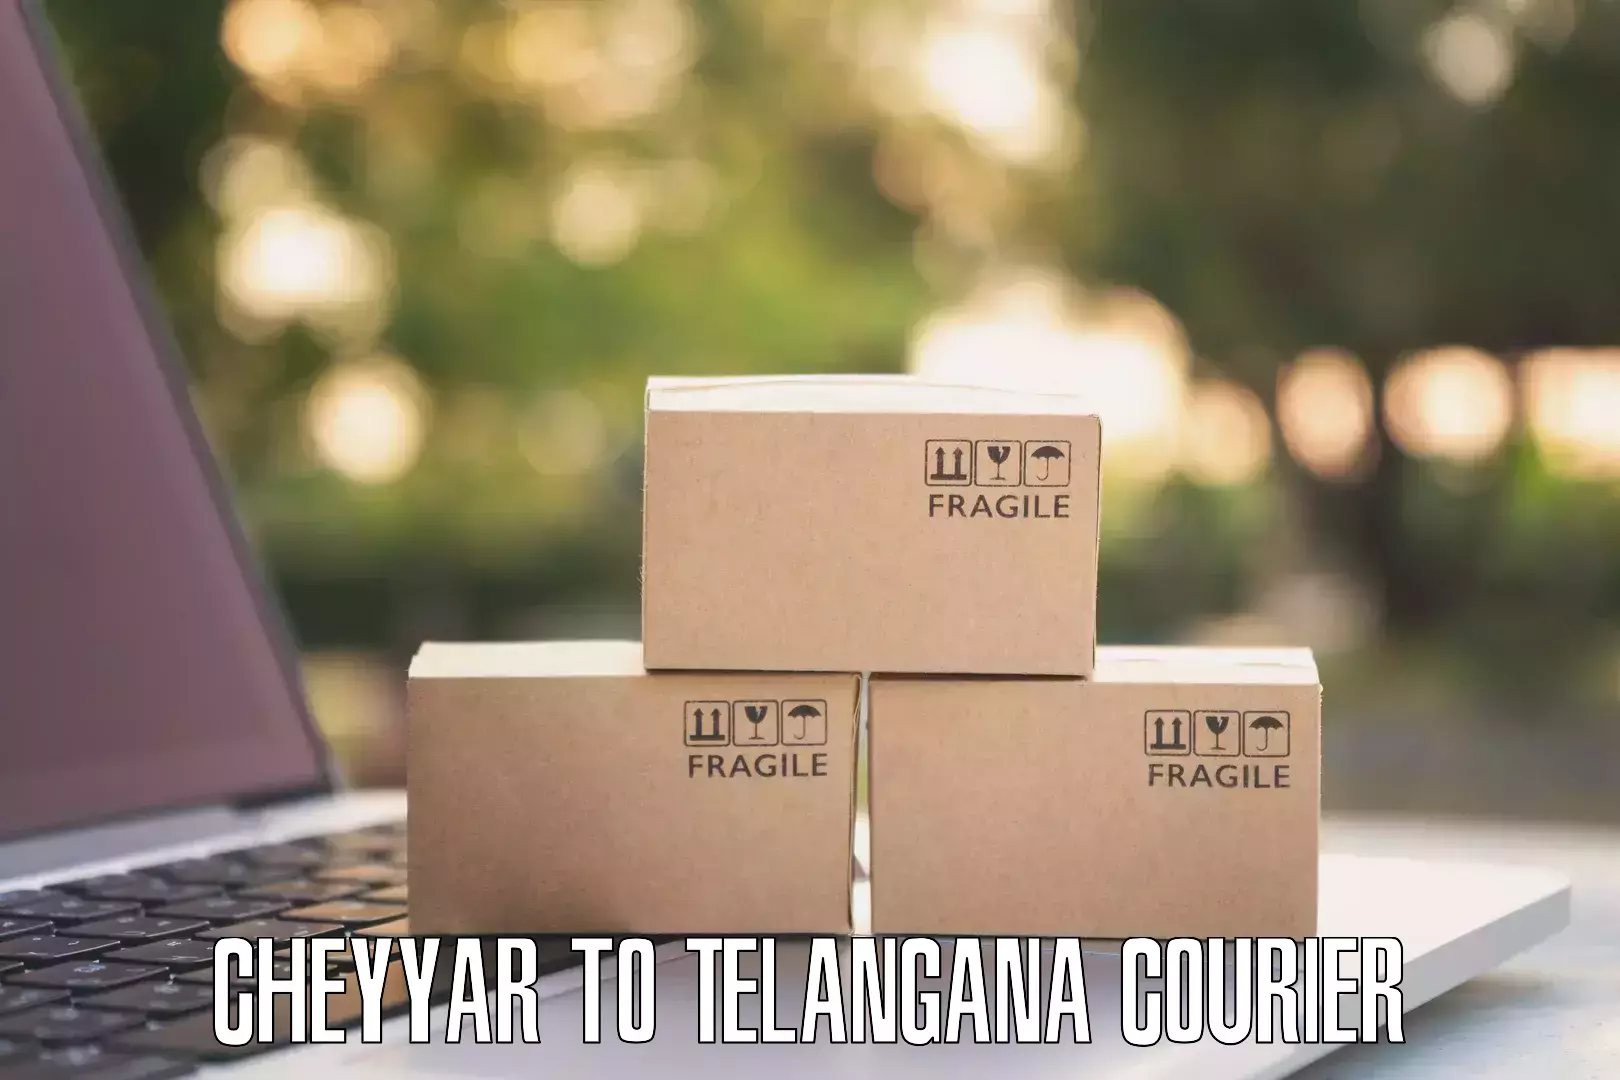 Courier service booking Cheyyar to Alair